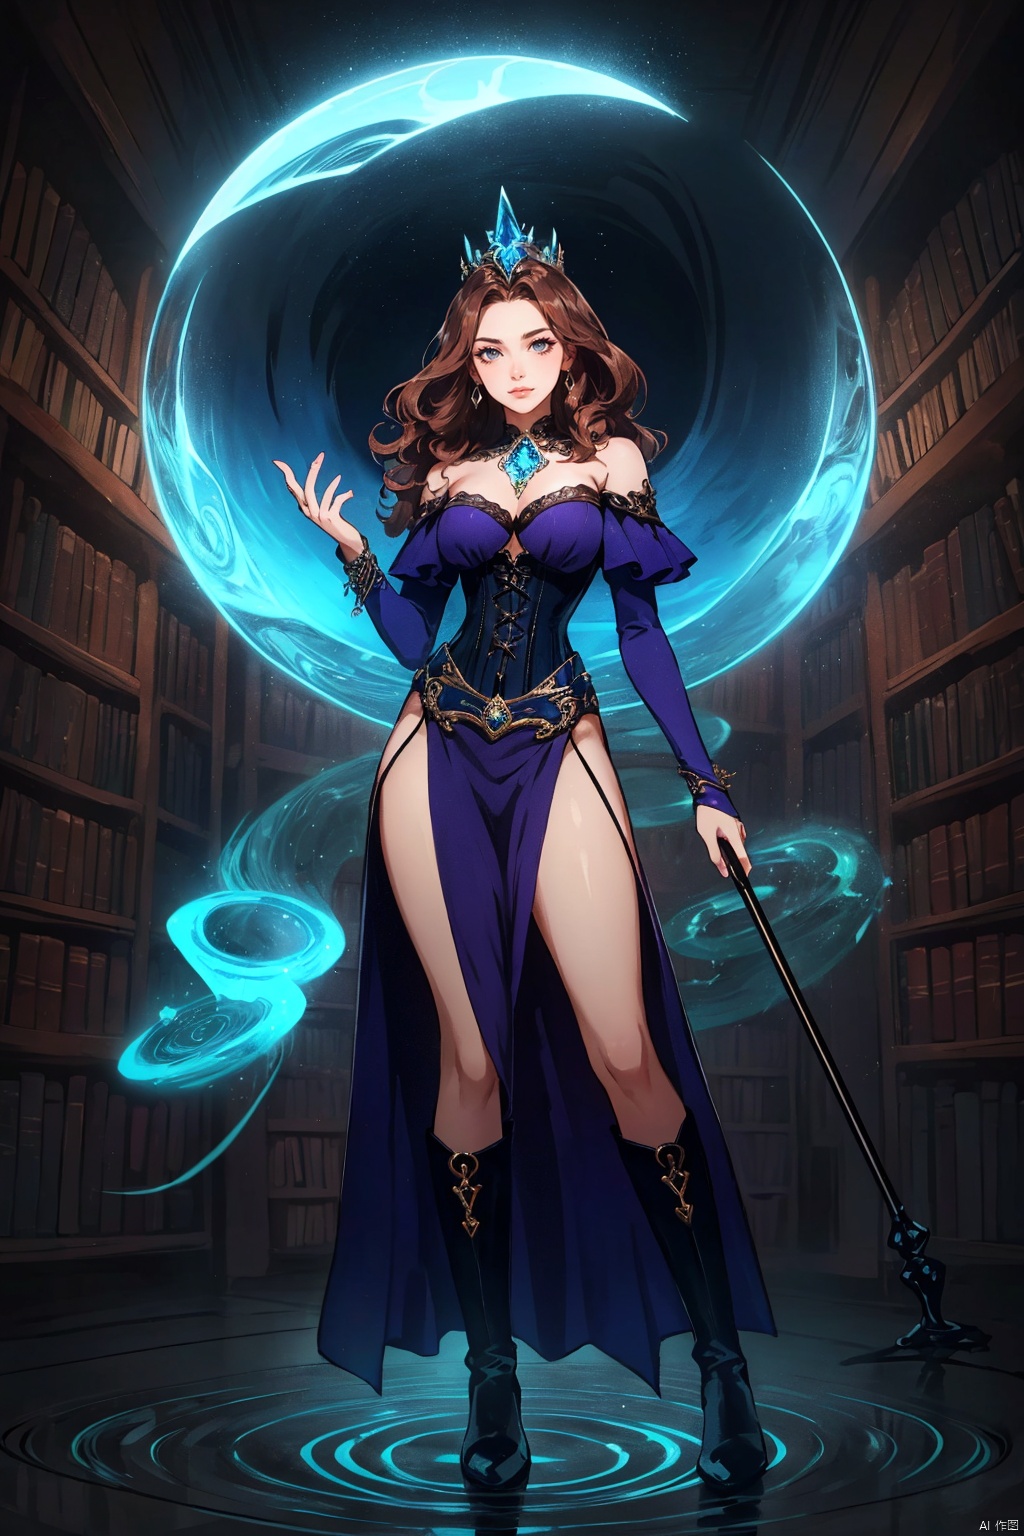 1girl, (sexy and alluring sorceress), ((full body)), (form-fitting dark purple and midnight blue corset dress with a high slit:1.3), (dress adorned with mystical sigils that softly glow in the dark), (matching opera-length gloves reaching above the elbow), (a pair of thigh-high boots with stiletto heels and arcane engravings), (shoulder-length curly chestnut hair styled in loose waves), (dramatic plum-colored lipstick and smoky eye makeup), (carrying an ornate staff crowned with a glowing crystal orb at its tip), (bracelets on both wrists featuring enchanted gemstones), (summoning circle and runes inscribed beneath her feet), (standing in front of a swirling vortex of magical energy:1.4), (background: a shadowy, ancient library filled with floating books and orbs of light), (intense gaze with a hint of mystery and power), (body language exuding confidence and allure), (ethereal aura of dark purple and blue magic emanating from her).,((poakl)), ,(wide shot:0.95)